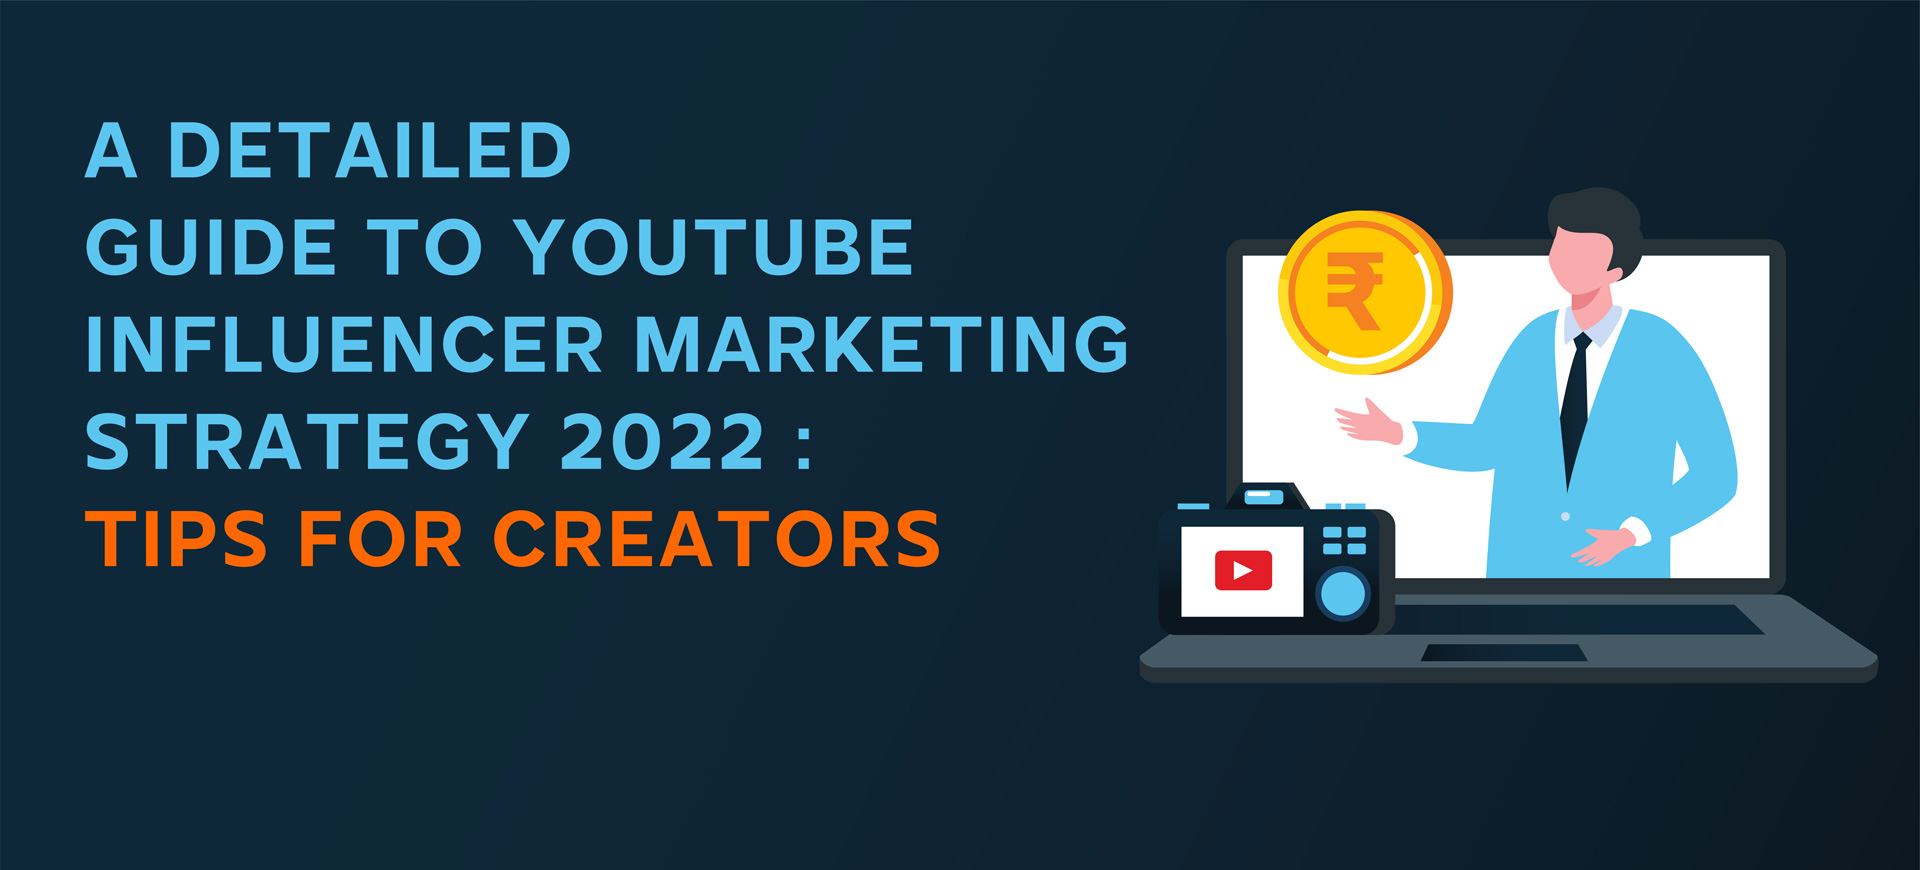 A Detailed Guide To YouTube Influencer Marketing Strategy 2022 : Tips For Creators